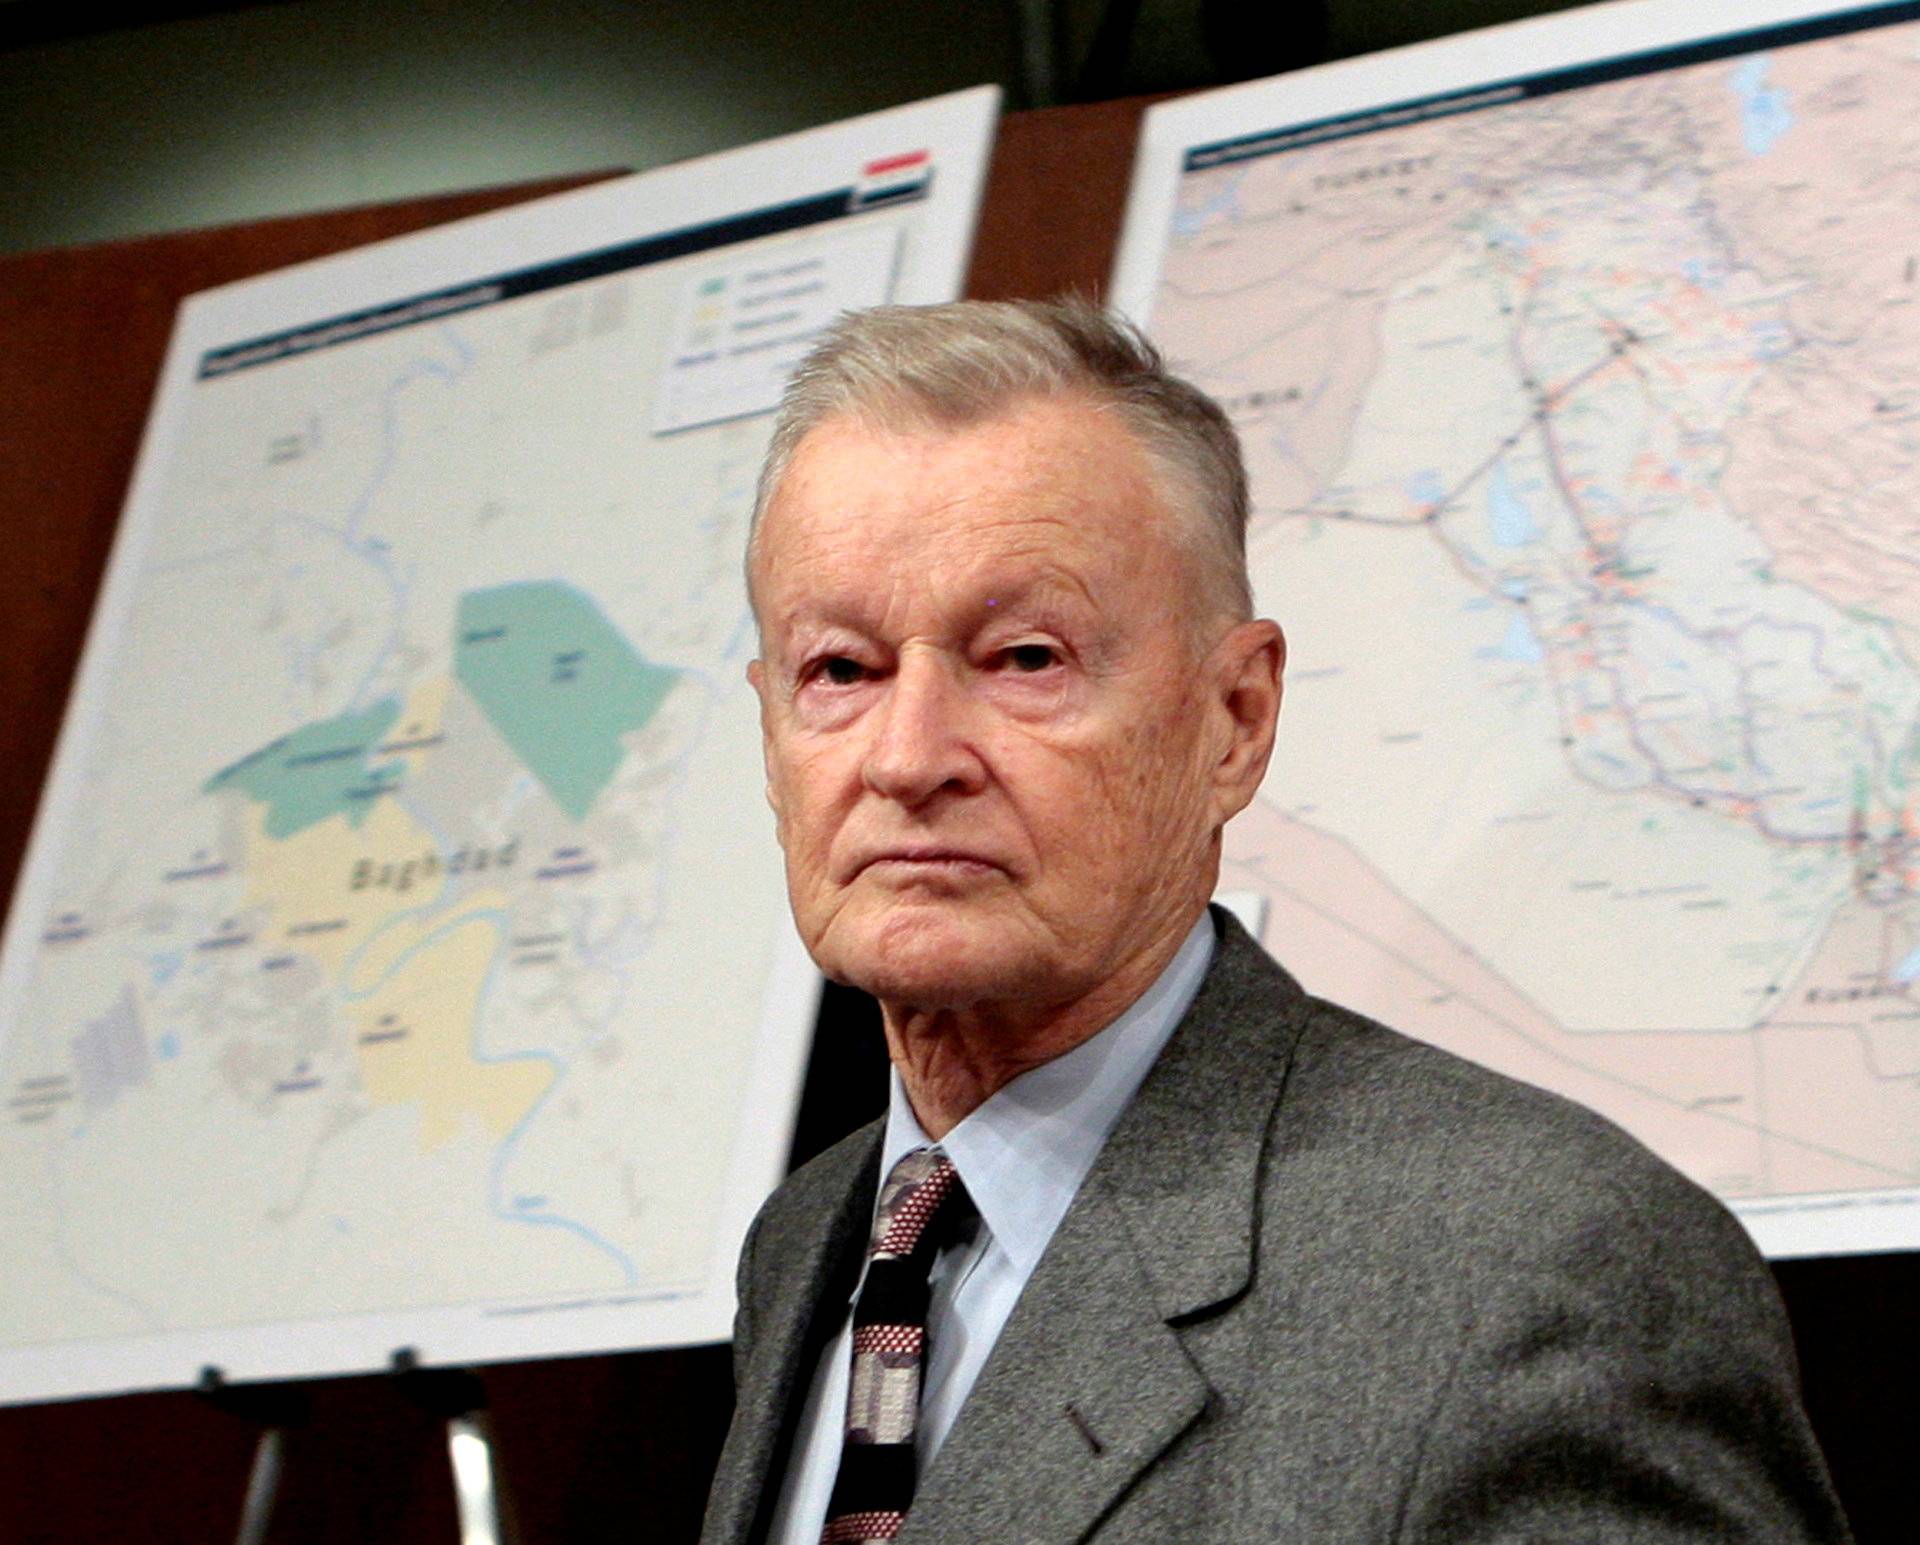 FILE PHOTO - Former U.S. National Security Adviser Zbigniew Brzezinski arrives to testify before the Senate Foreign Relations Committee on Capitol Hill in Washington